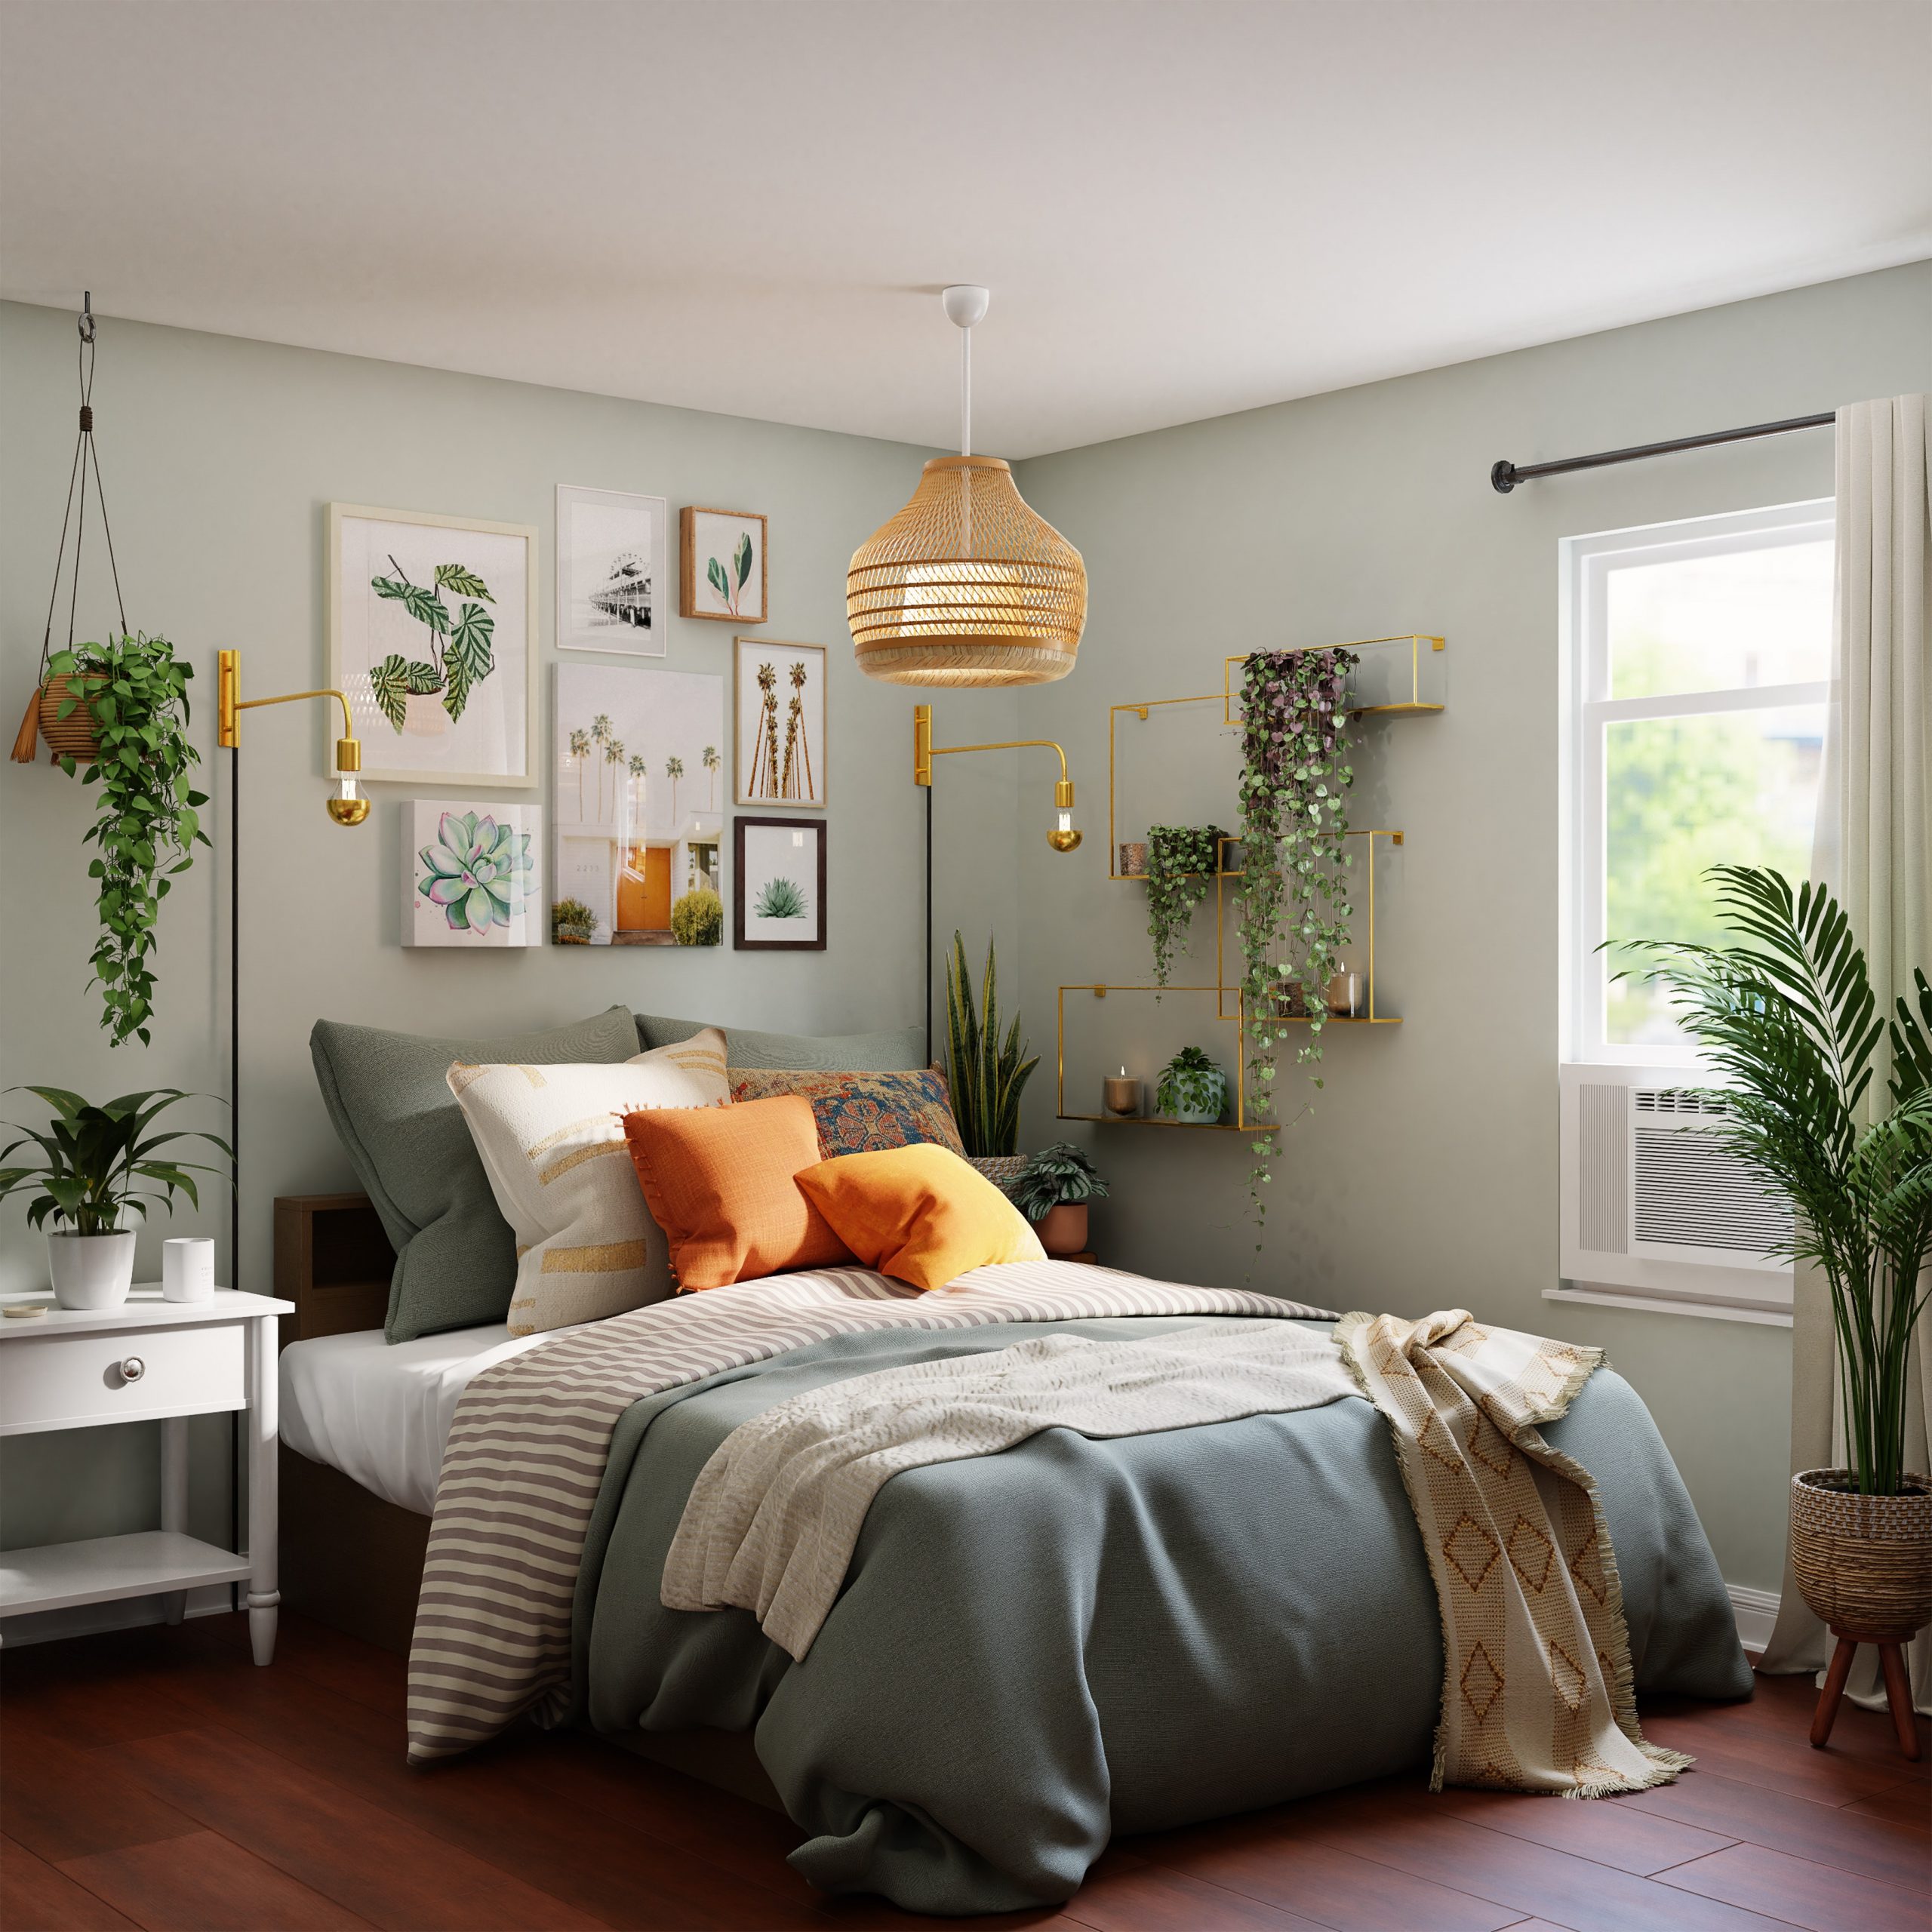 Use Calm Colors In Bedroom